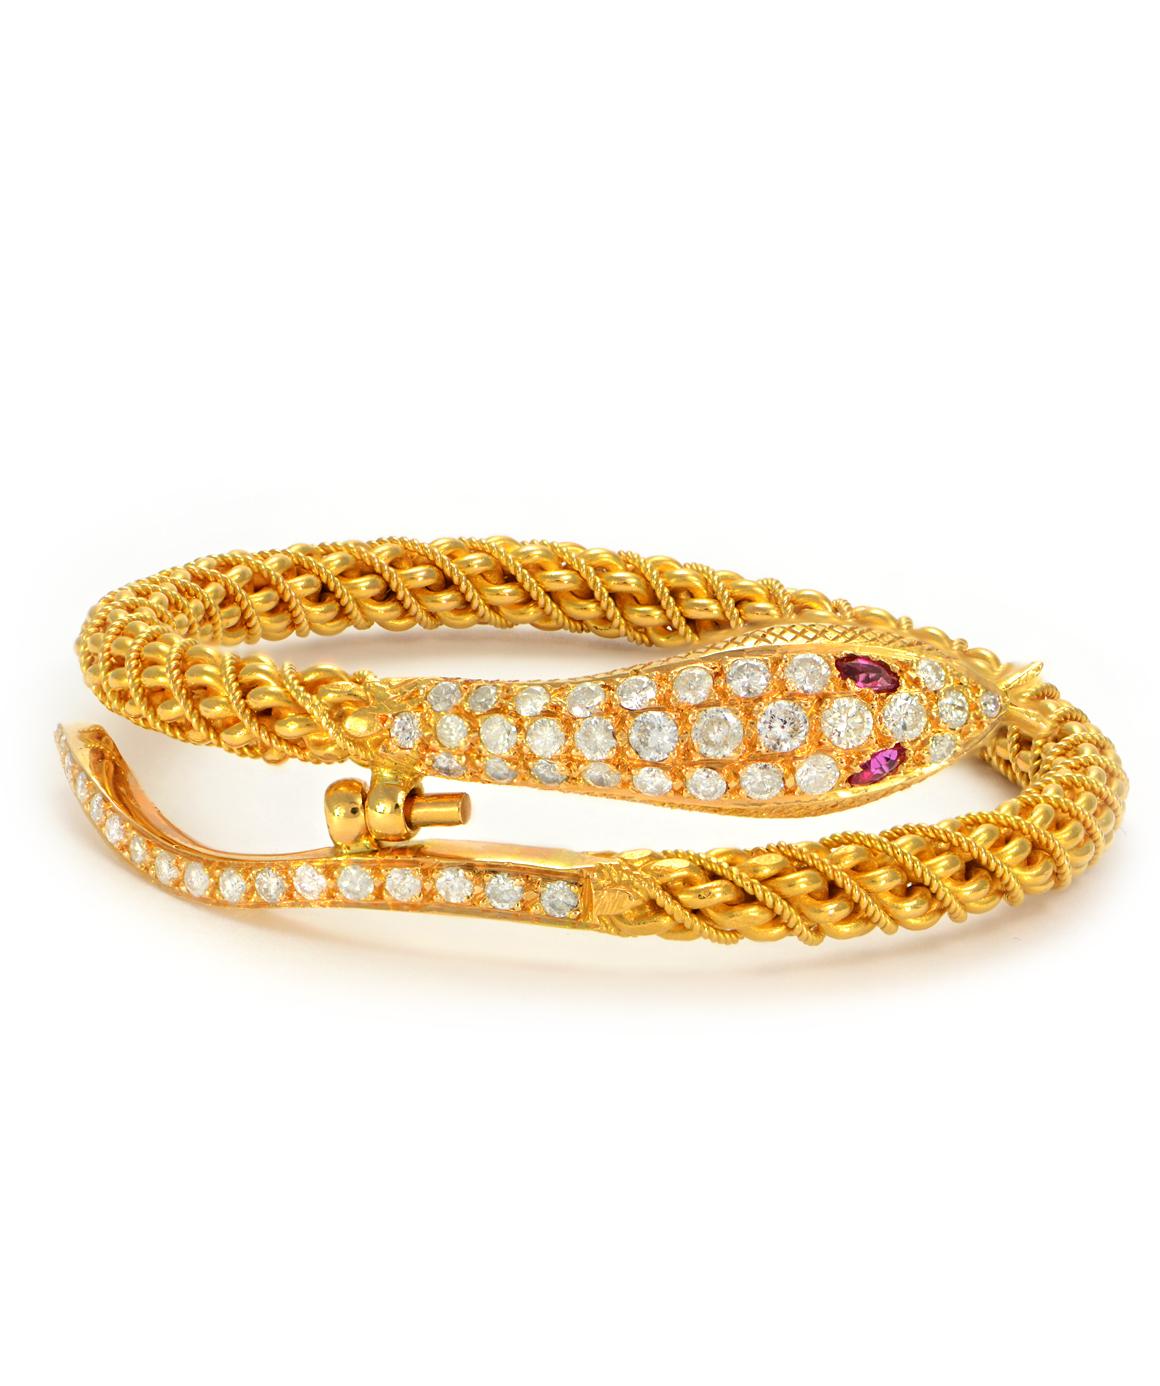 Solid 22 Karat Gold Textured Snake Bangle with Genuine Diamonds and Ruby 62.2g 1